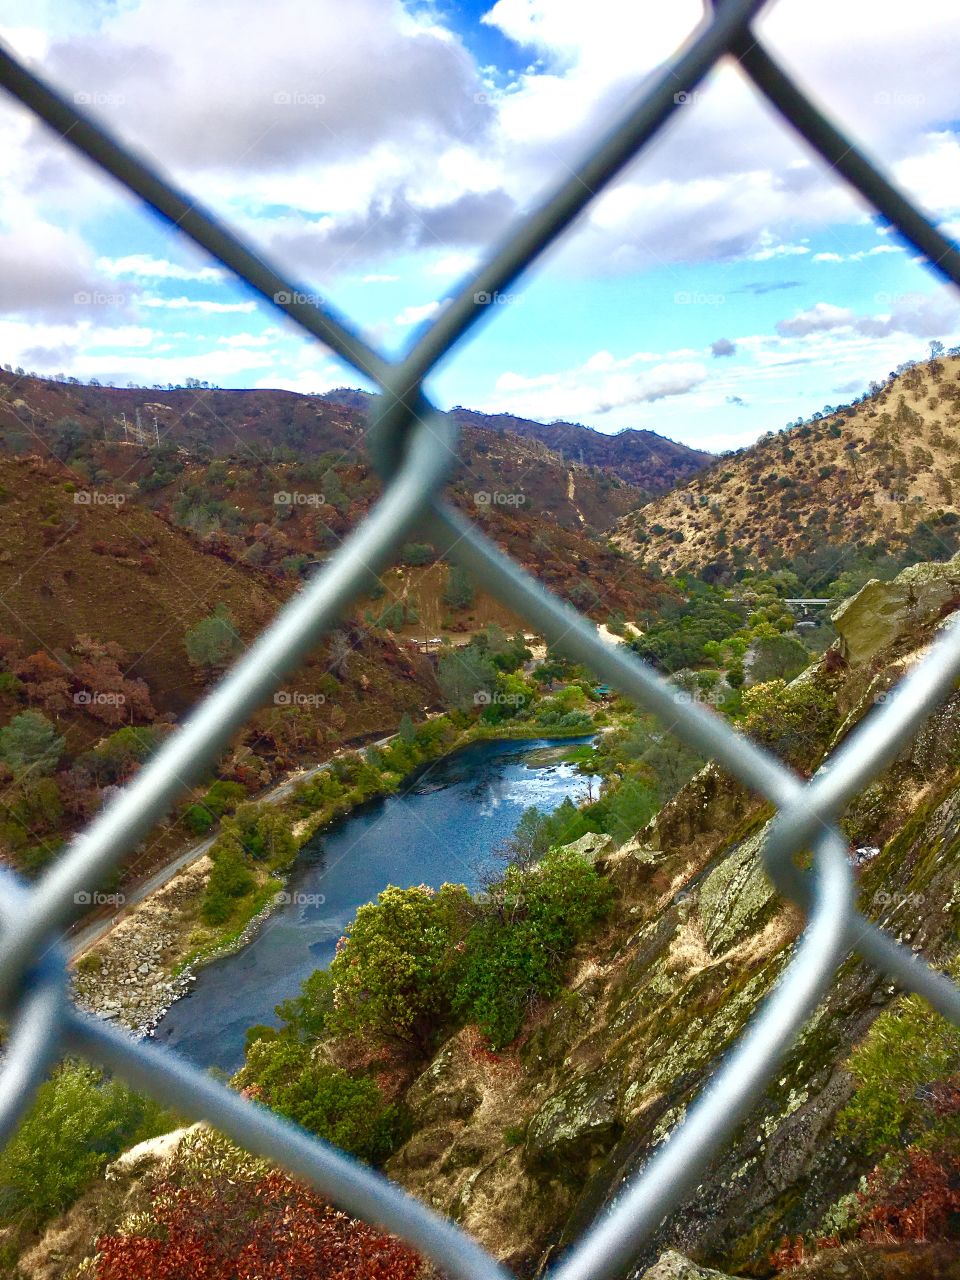 Scenic view of lake and mountains through chain linked fence. 